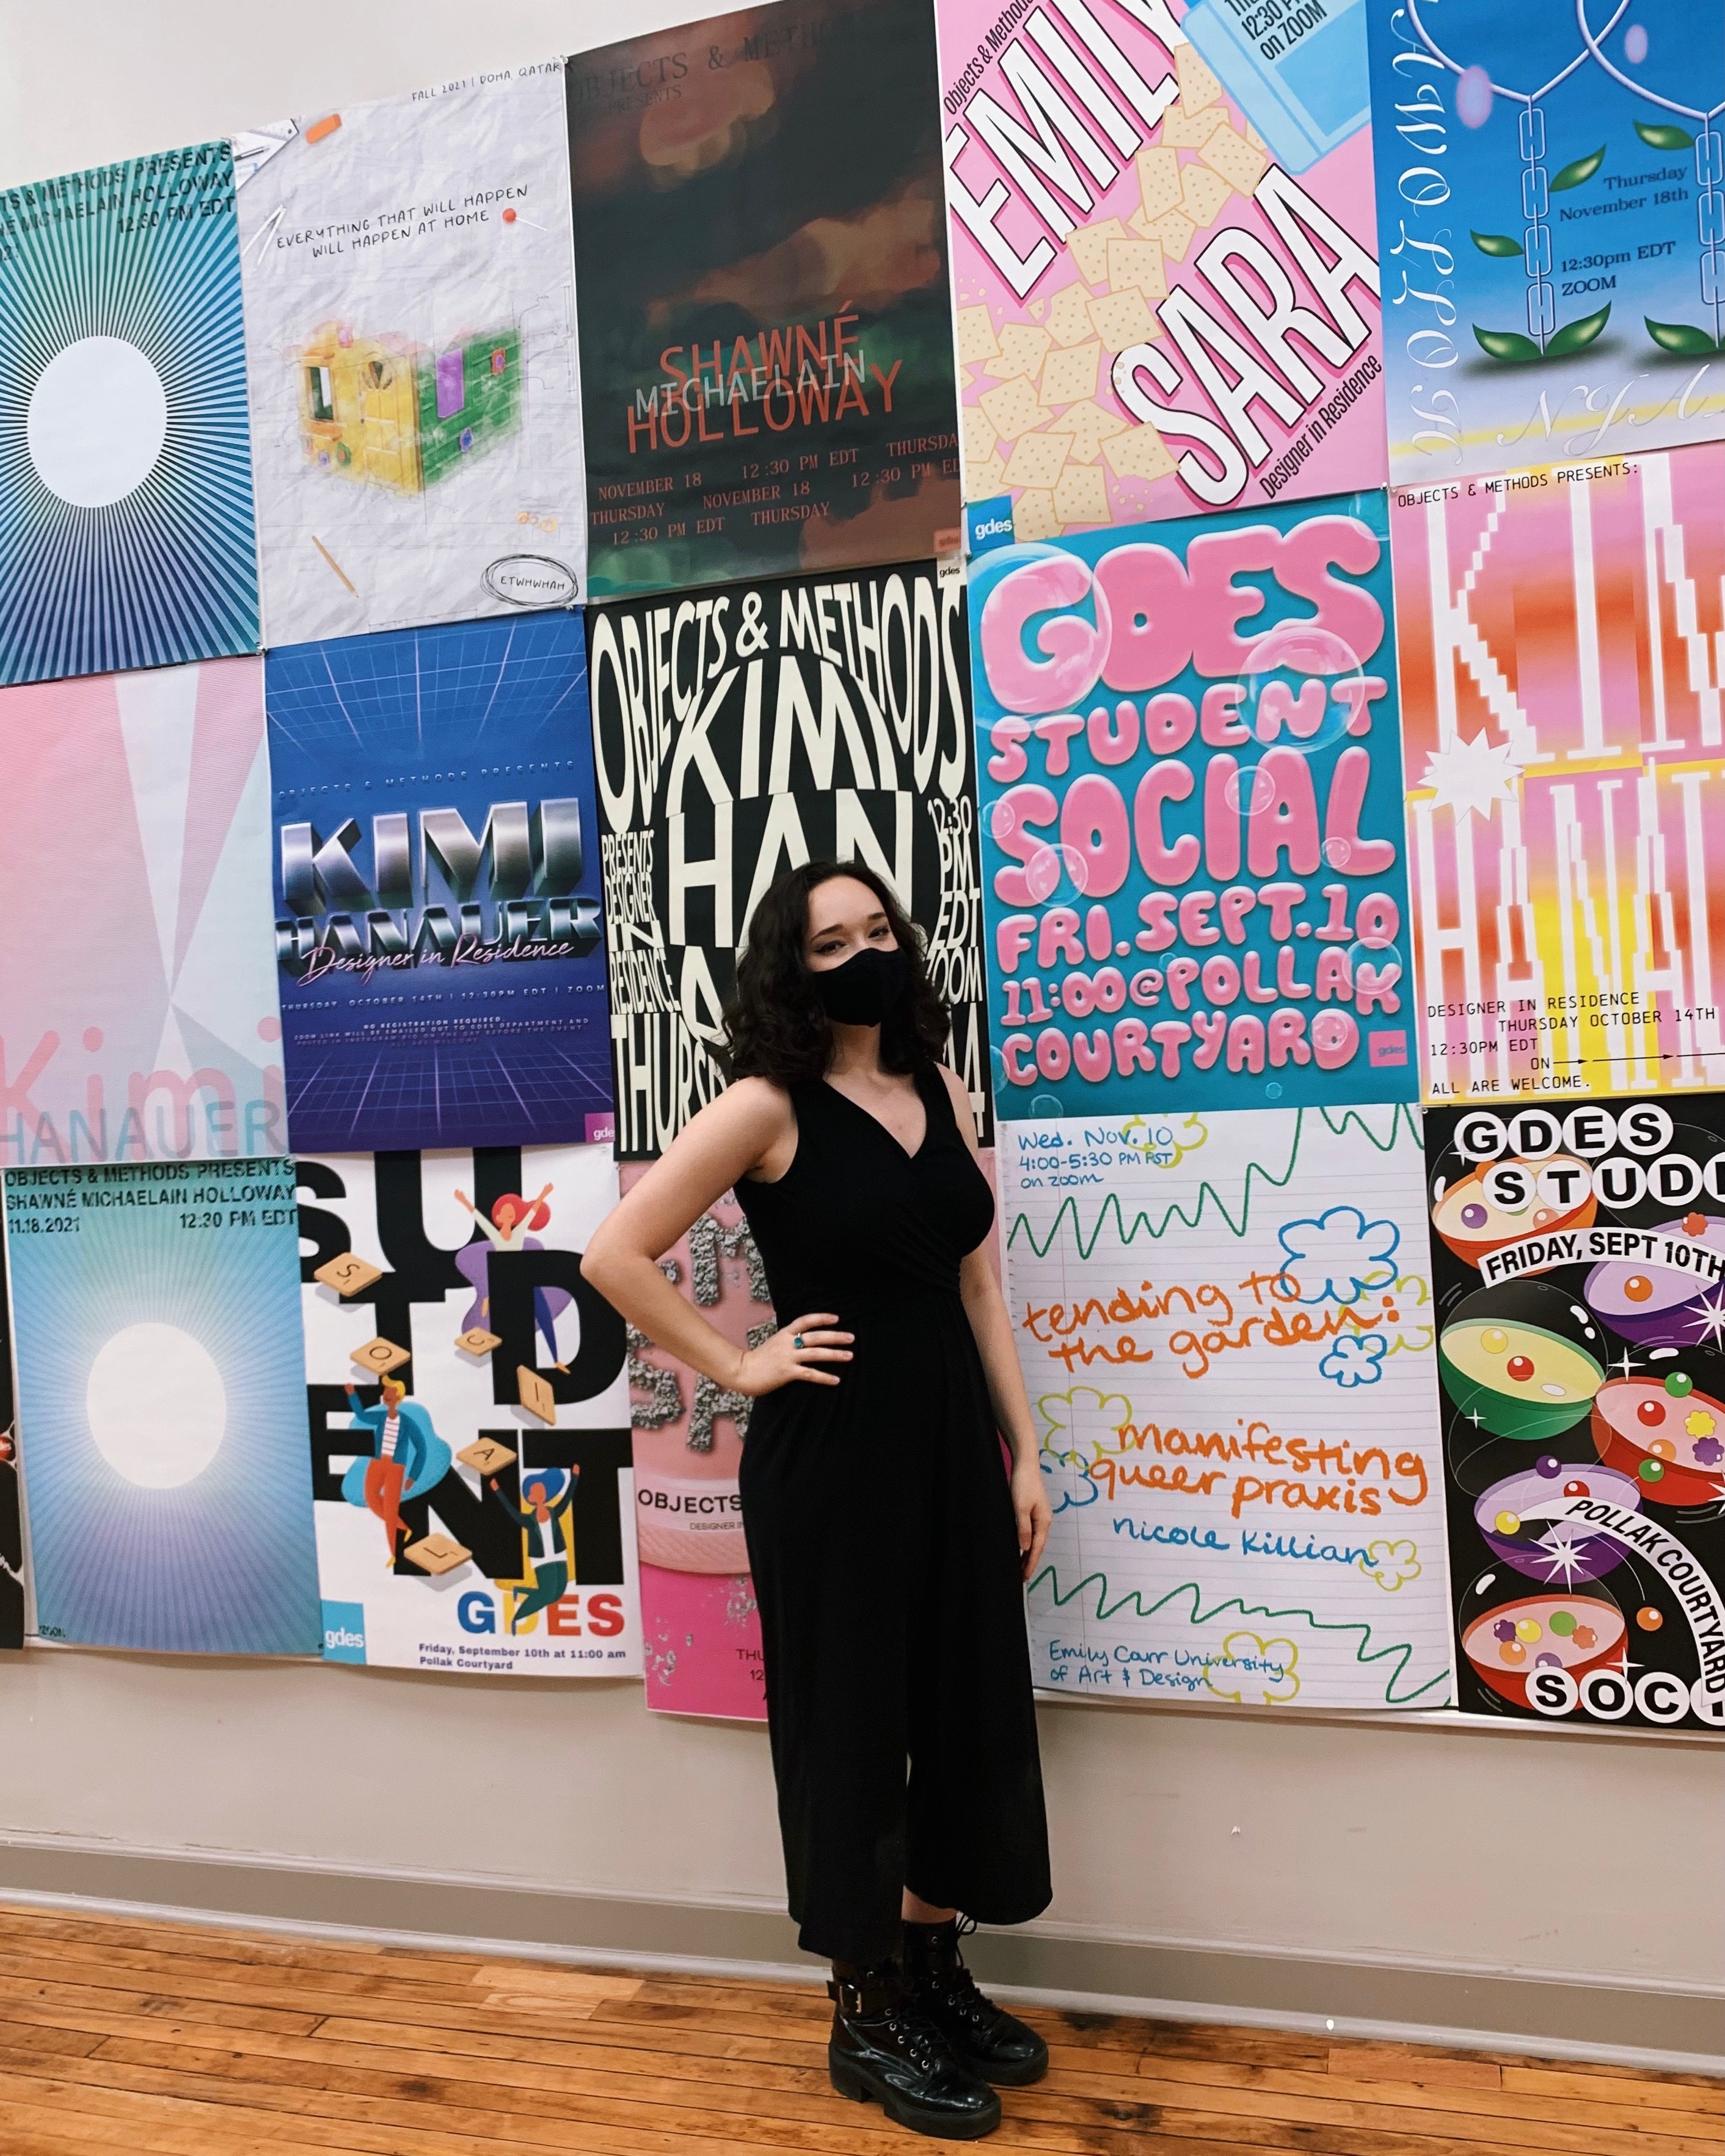 elora, dressed in all black, standing in front of a wall of posters